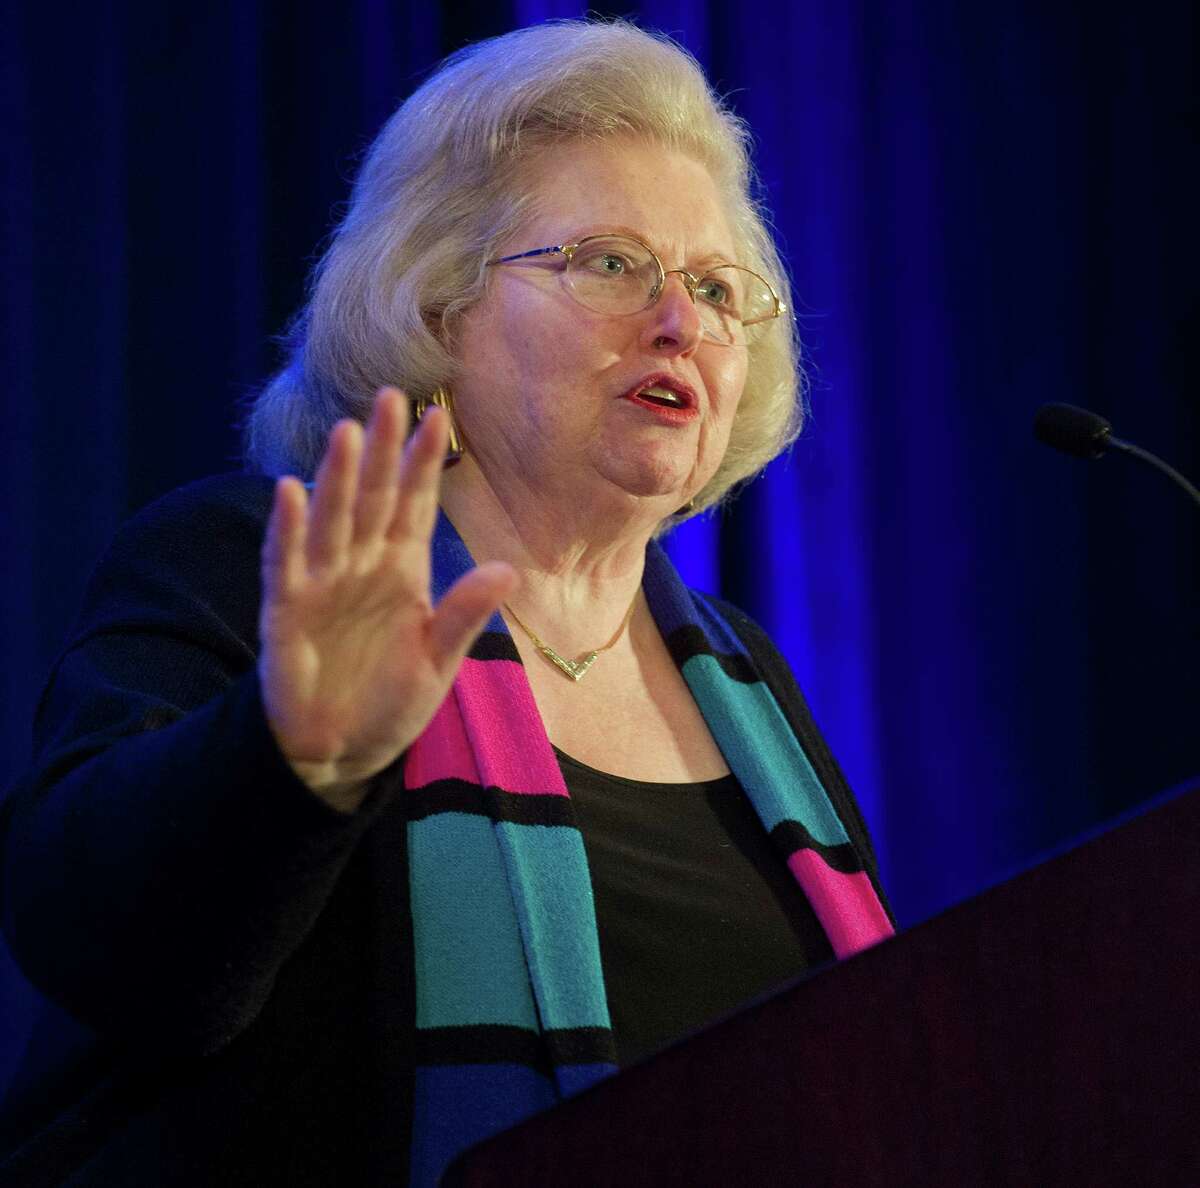 Sarah Weddington speaks at the annual spring luncheon for Planned Parenthood of Southern New England at the Marriott in Stamford, Conn., on Wednesday, April 9, 2014. Weddington is the attorney who successfully argued Roe V. Wade in the United States Supreme Court in 1973. She remains the youngest attorney to ever argue a case in front of the Supreme Court.